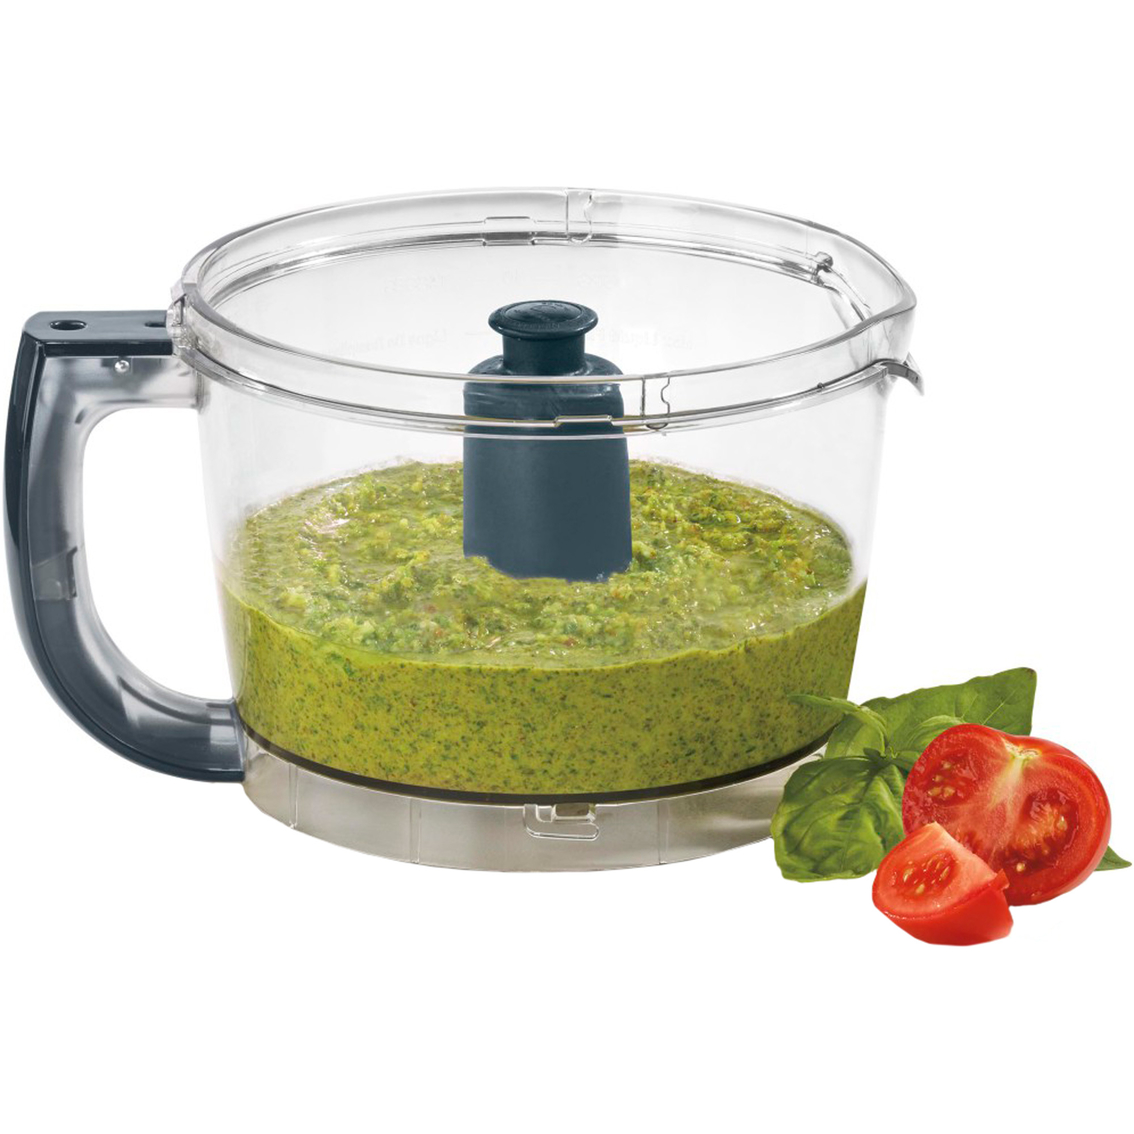 Elite Collection 2.0 12-Cup Food Processor in Die Cast - Image 7 of 9